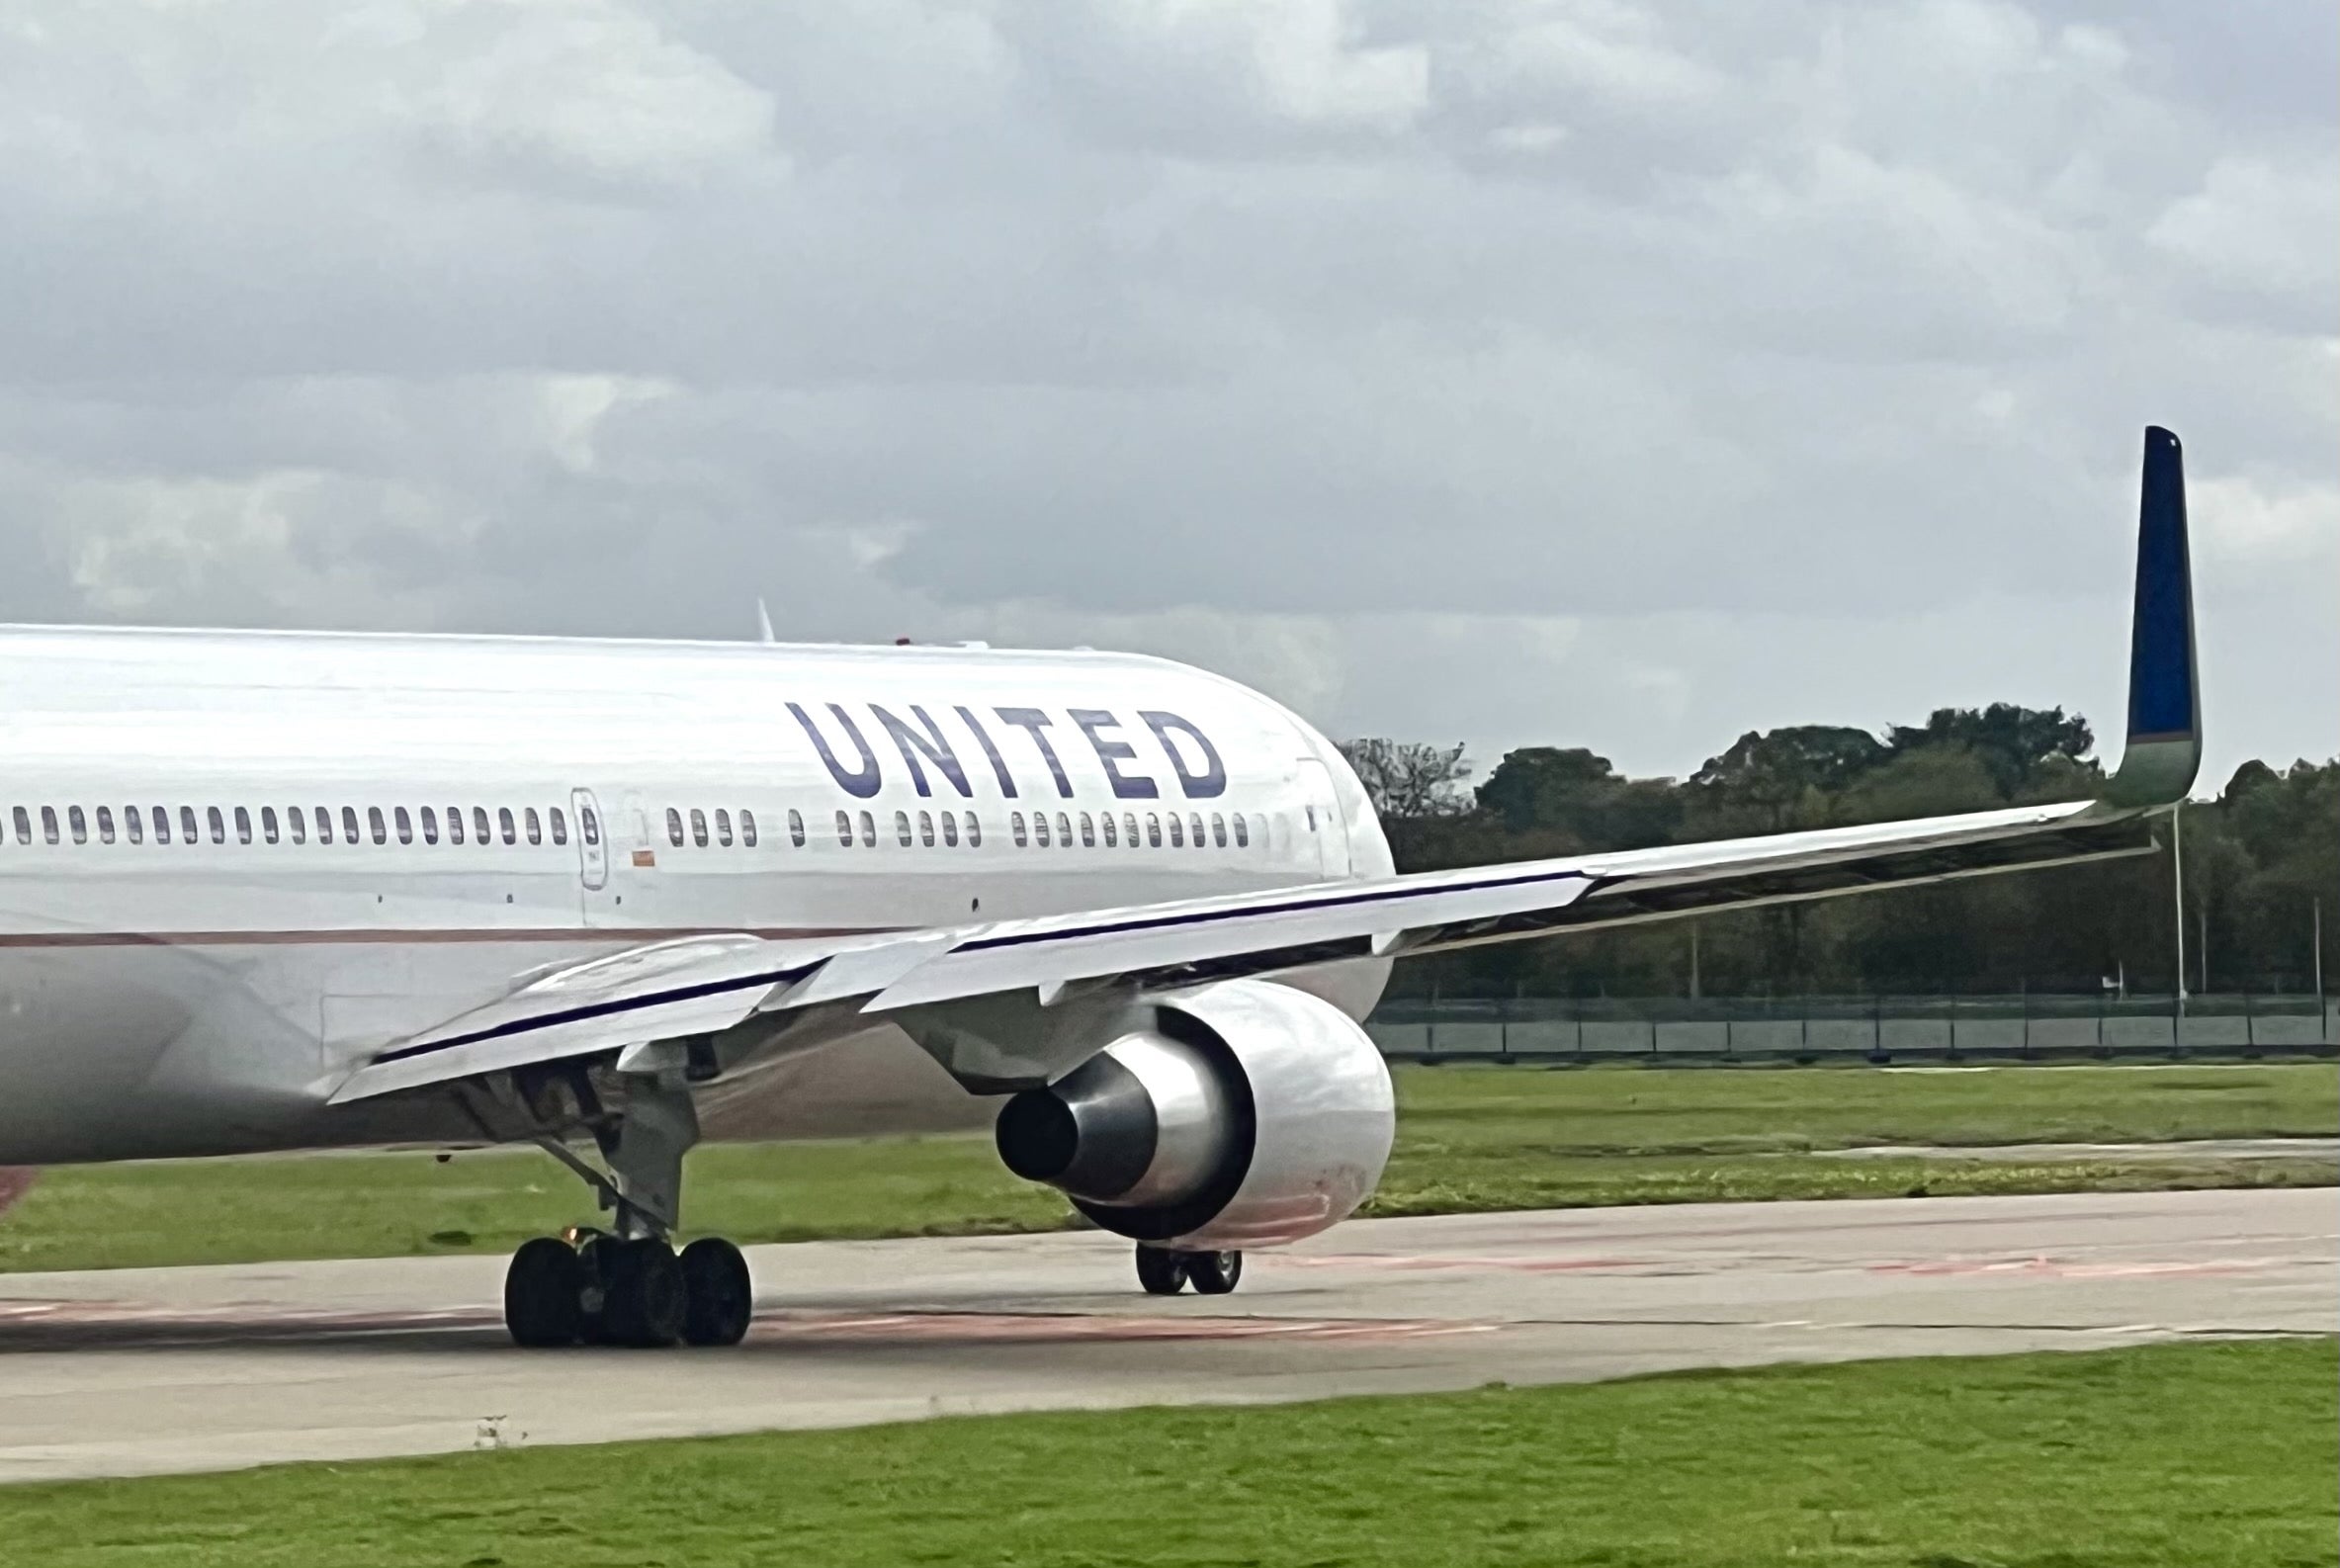 A United Boeing 767 300 at London Heathrow Airport